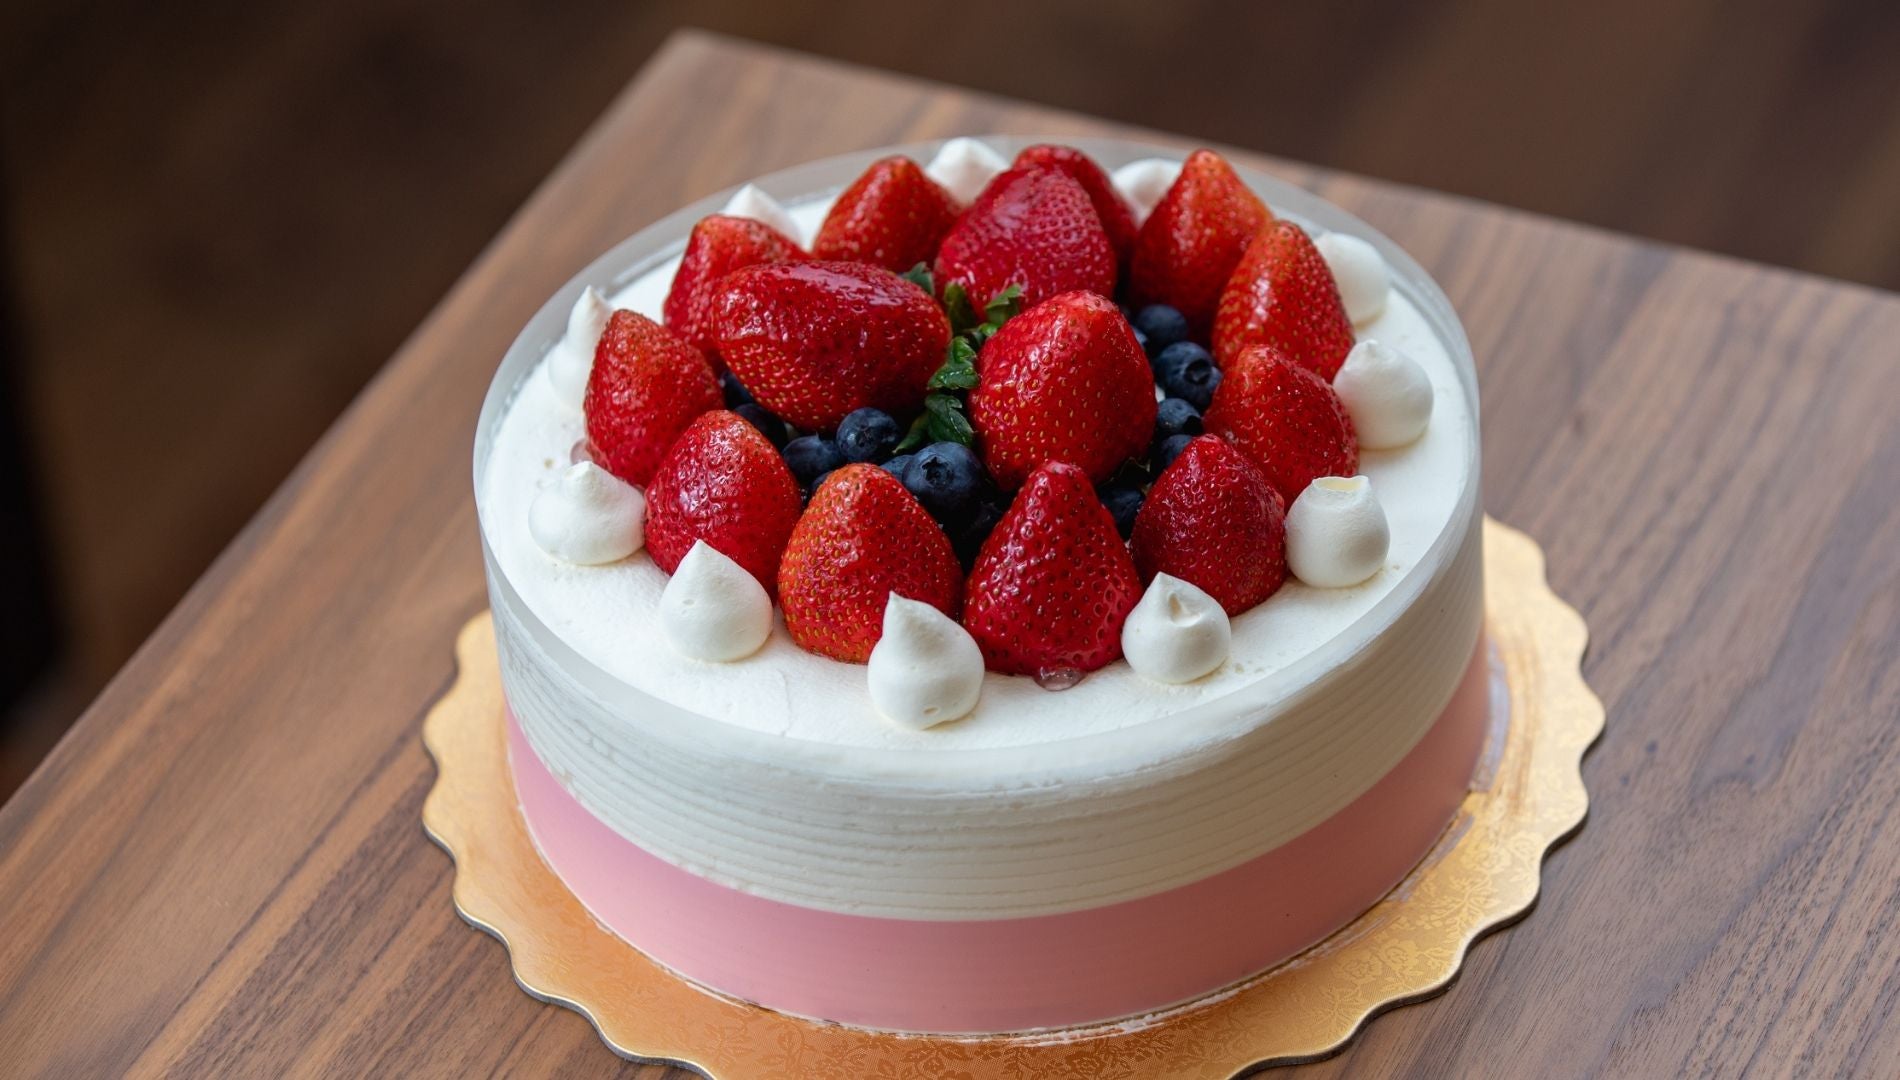 The Fully Loaded Strawberry Cake